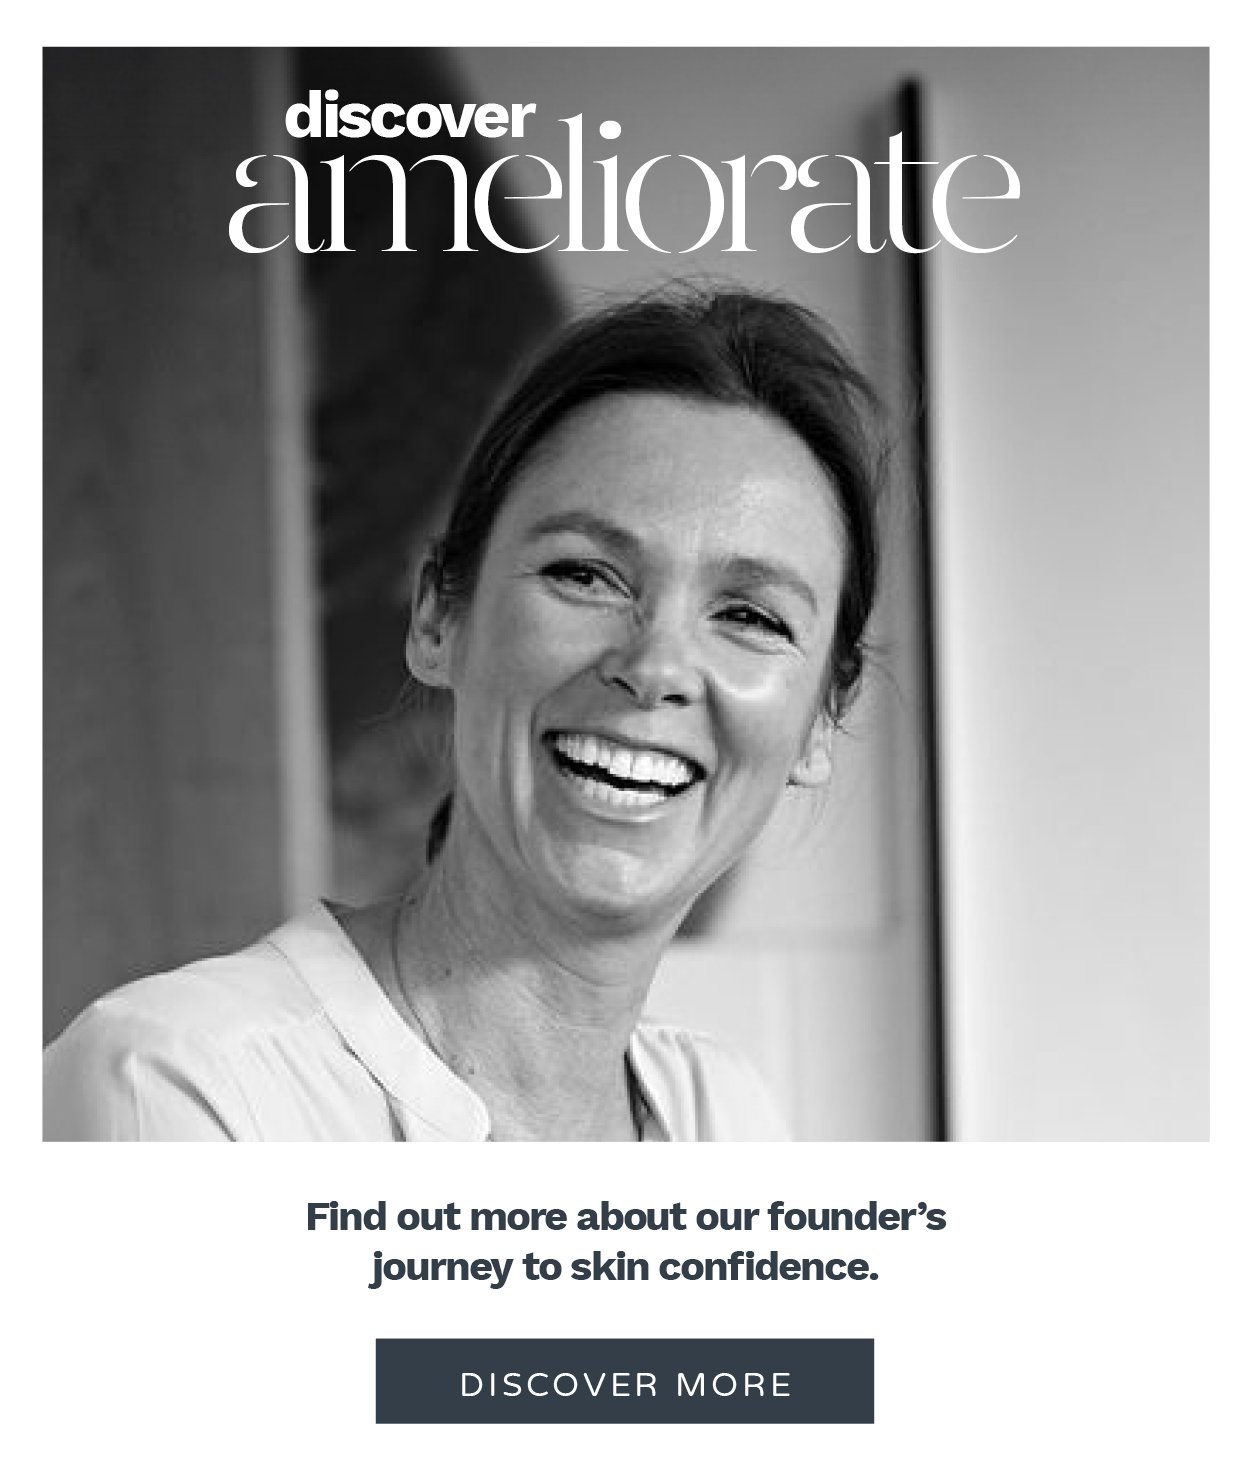 Discover more about the founder of Ameliorate